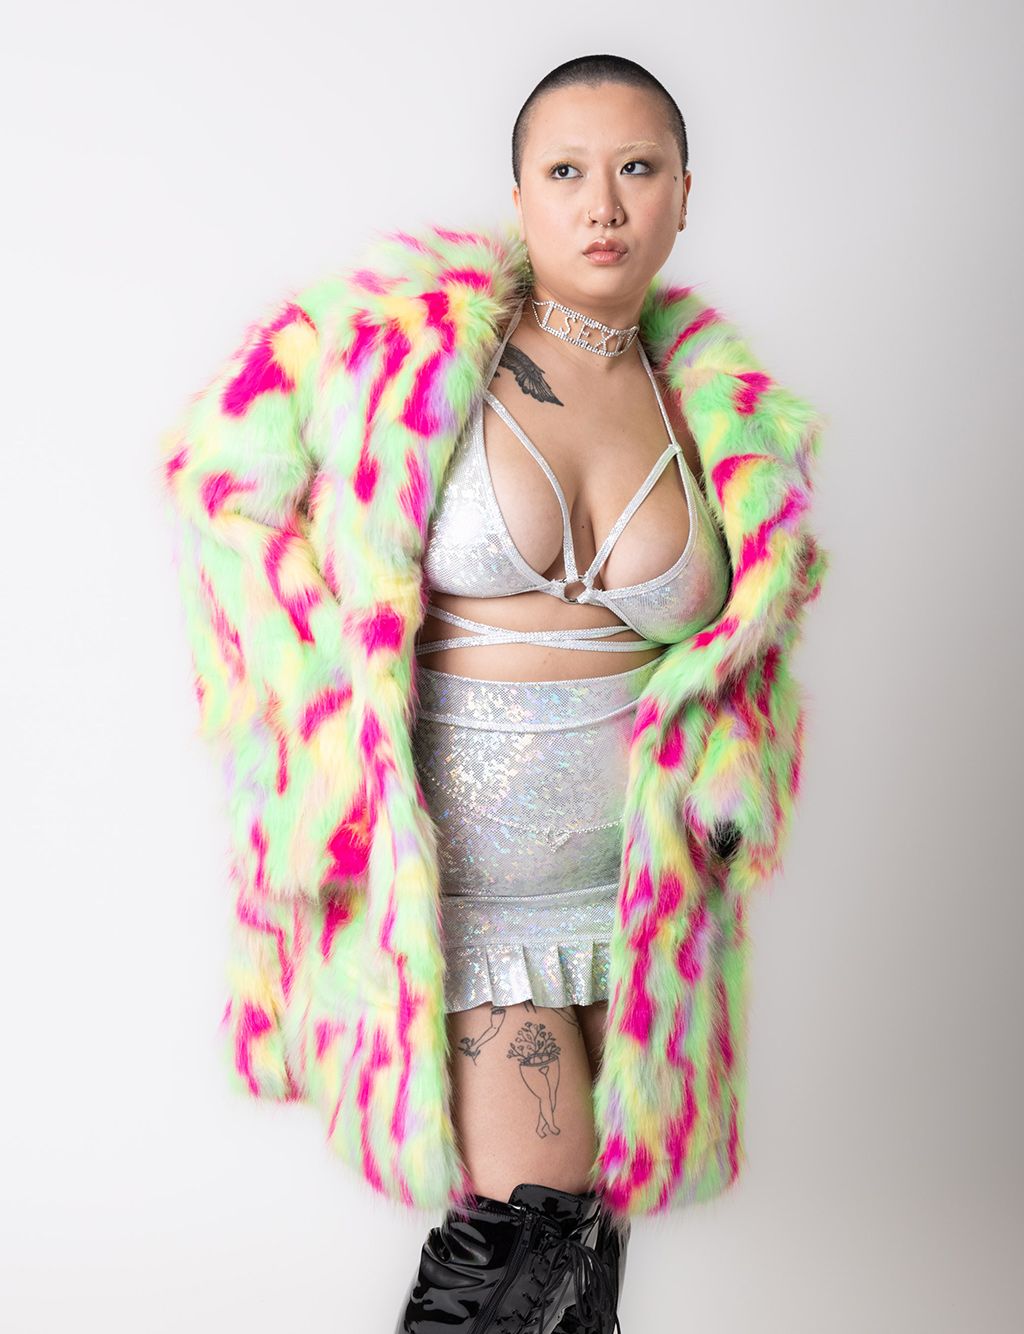 PARTY MONSTER FAUX FUR JACKET - MID LENGTH ✰ MADE 4 U ✰